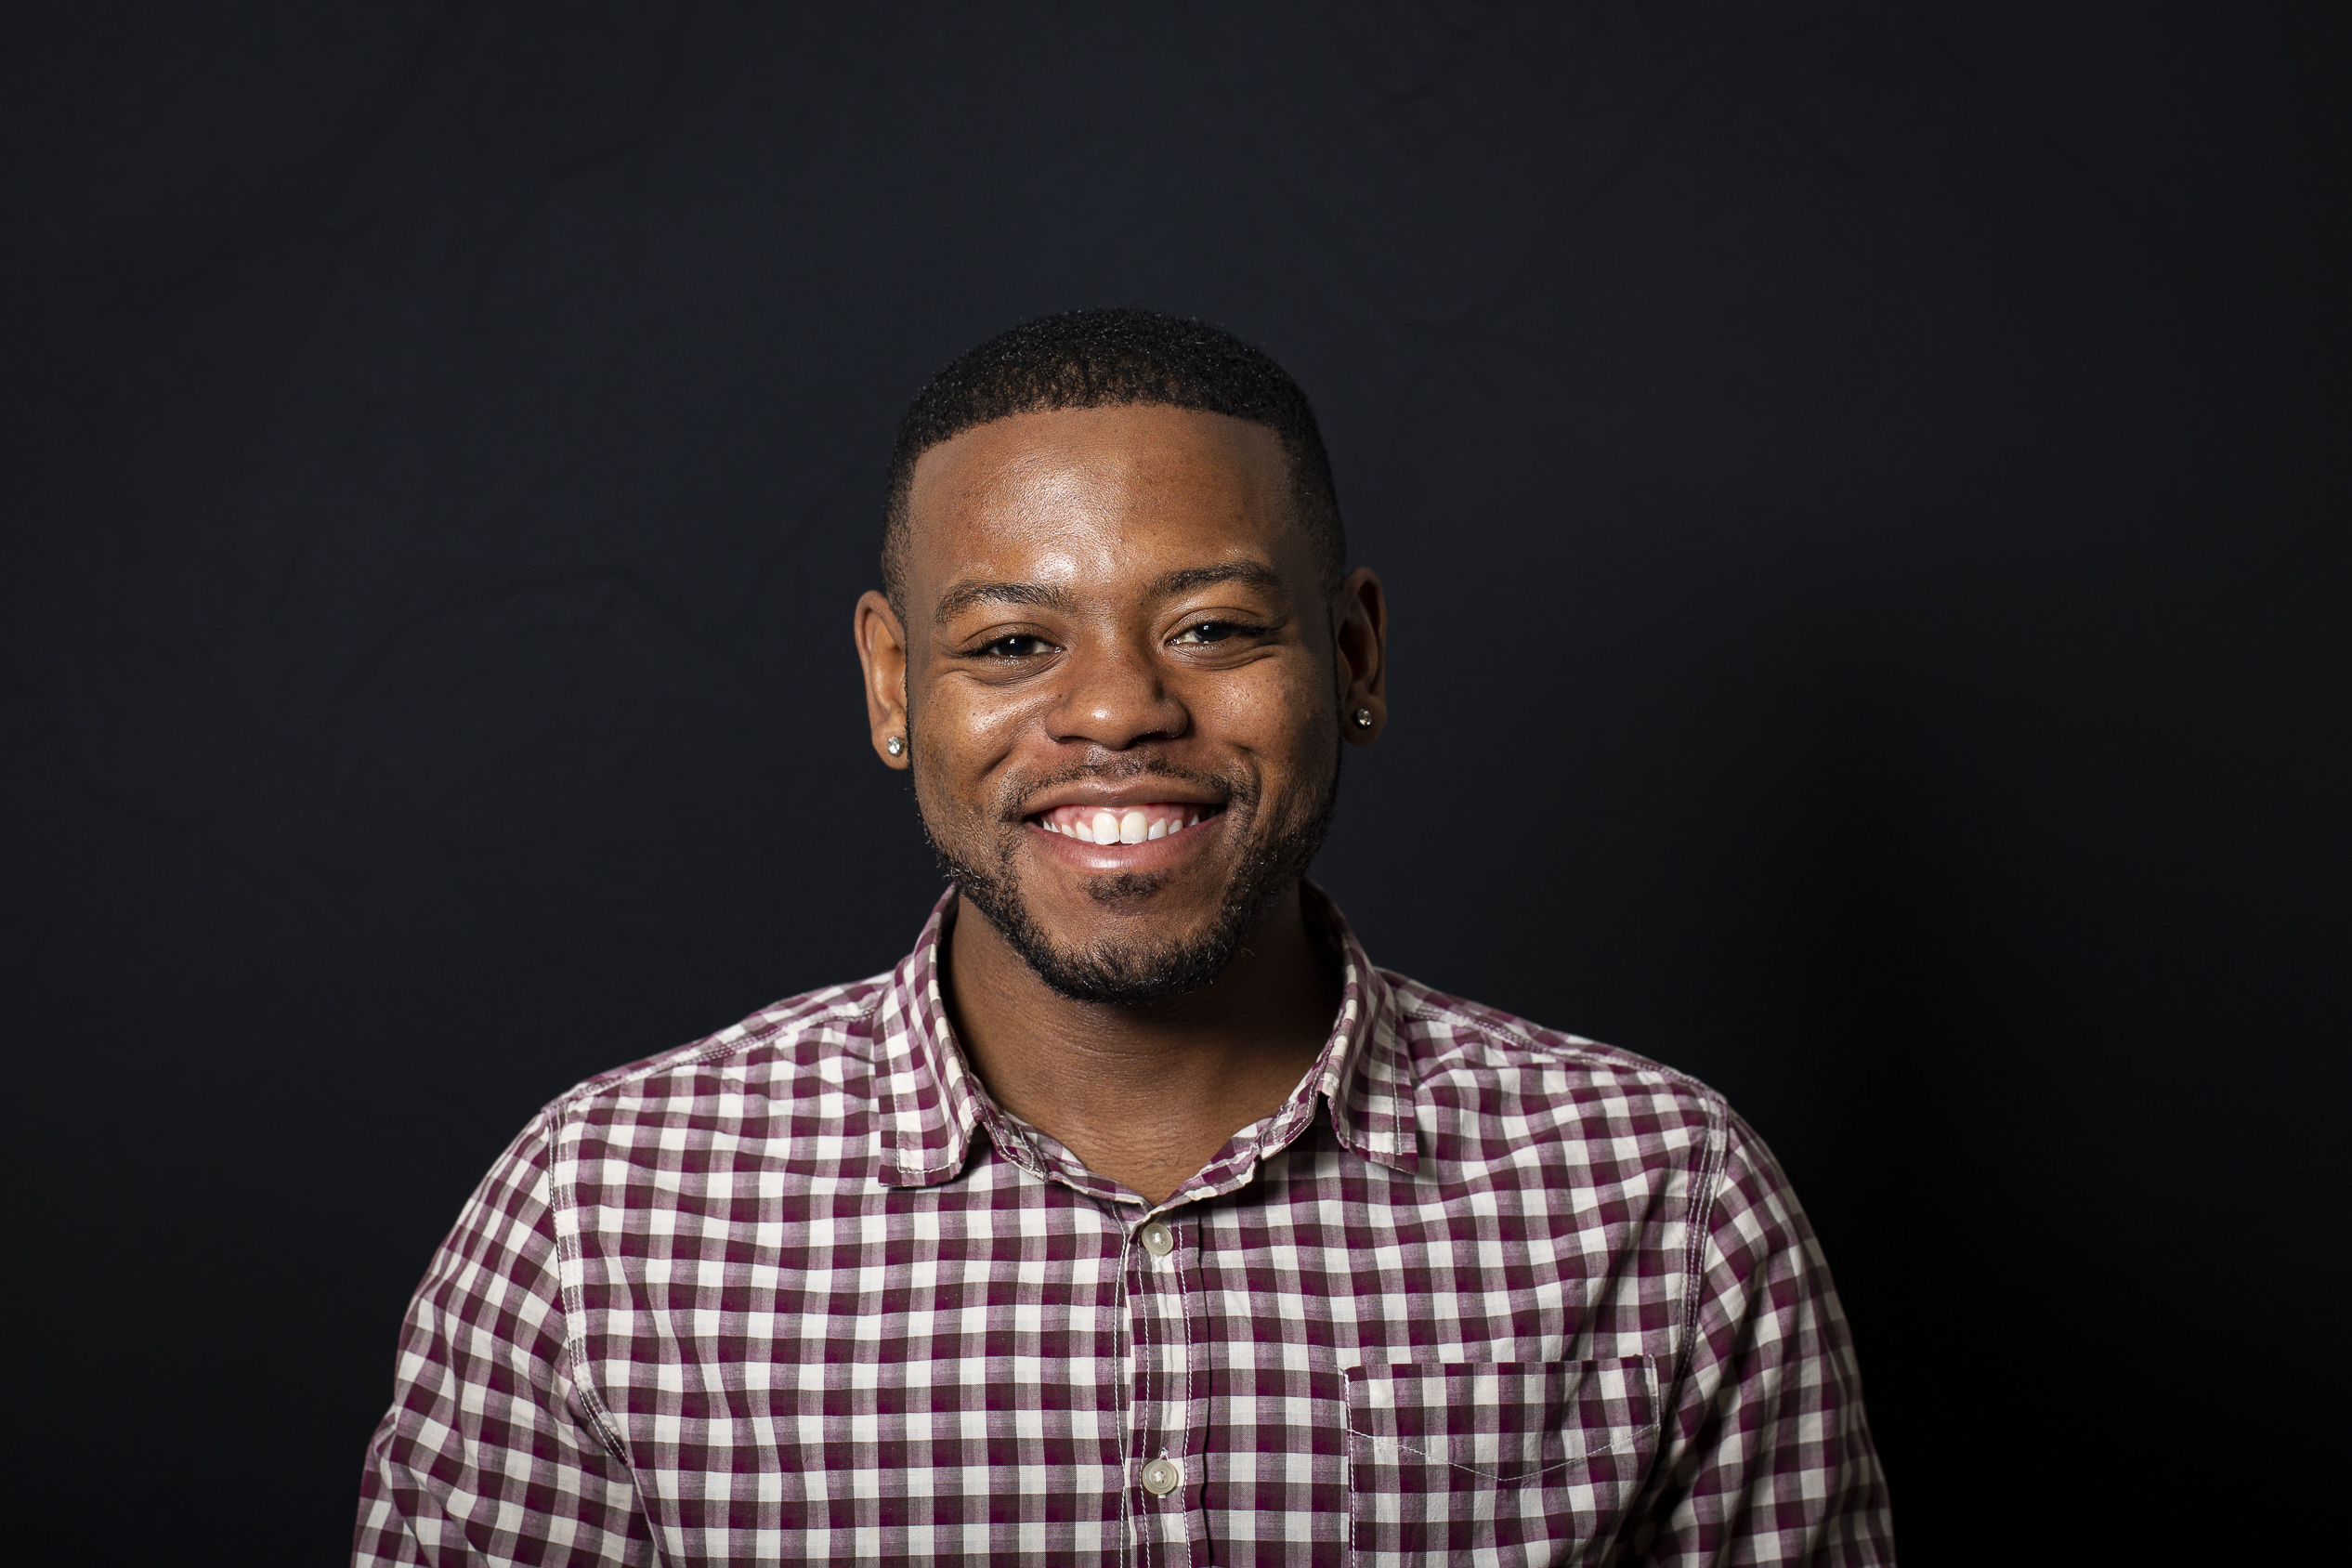 This P.h.D Student is Building a Mental Health App For Black Youth